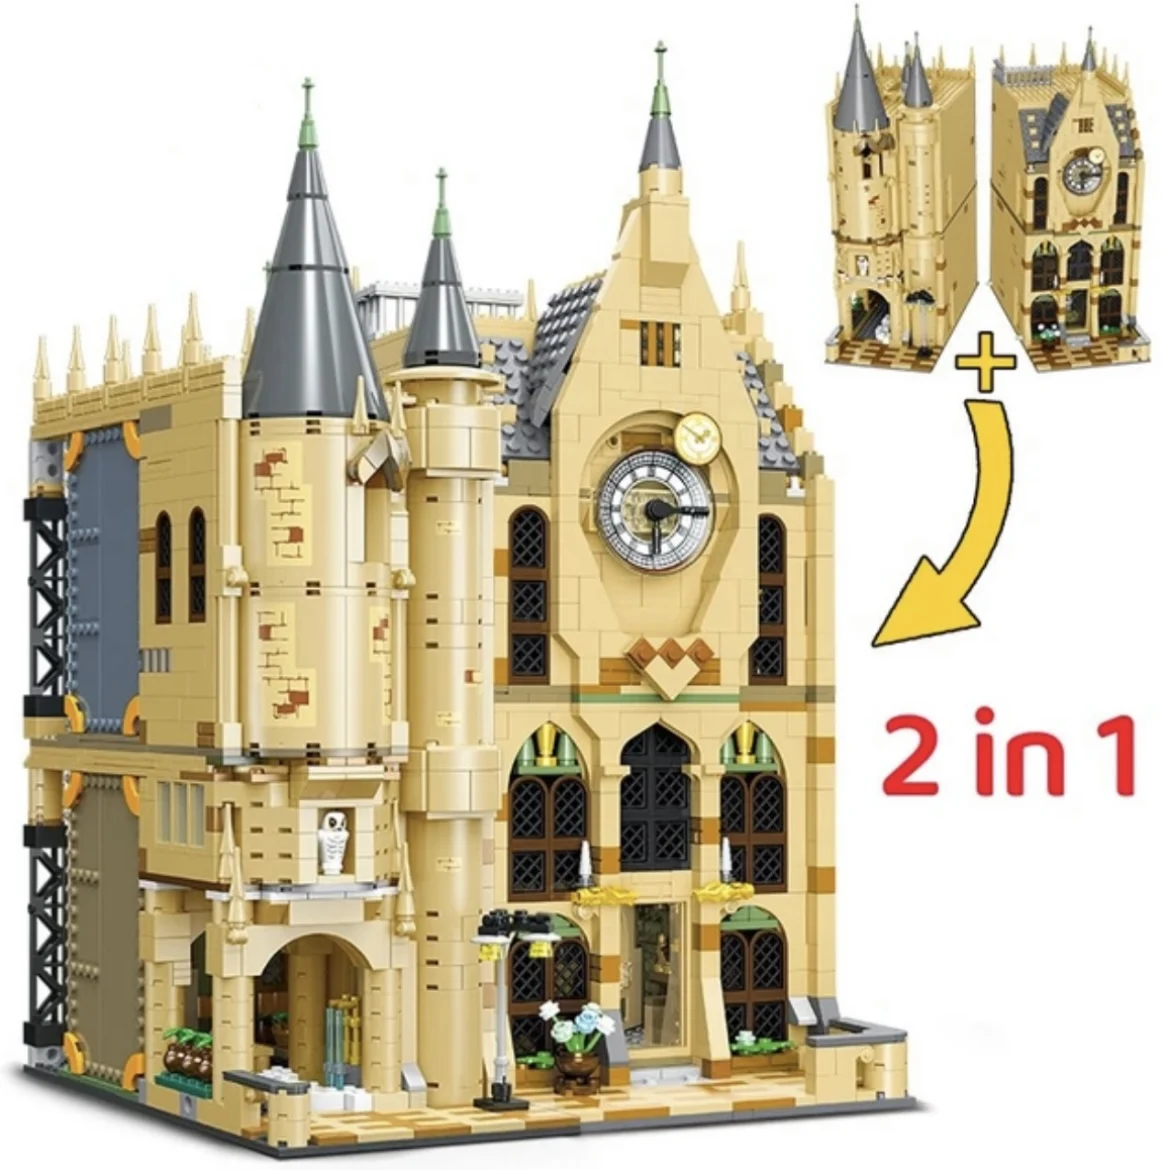 

Creative Magic Movie Castle Bell Clock Tower Building Blocks Medieval Architecture Brick Toy For Children Birthday Gift